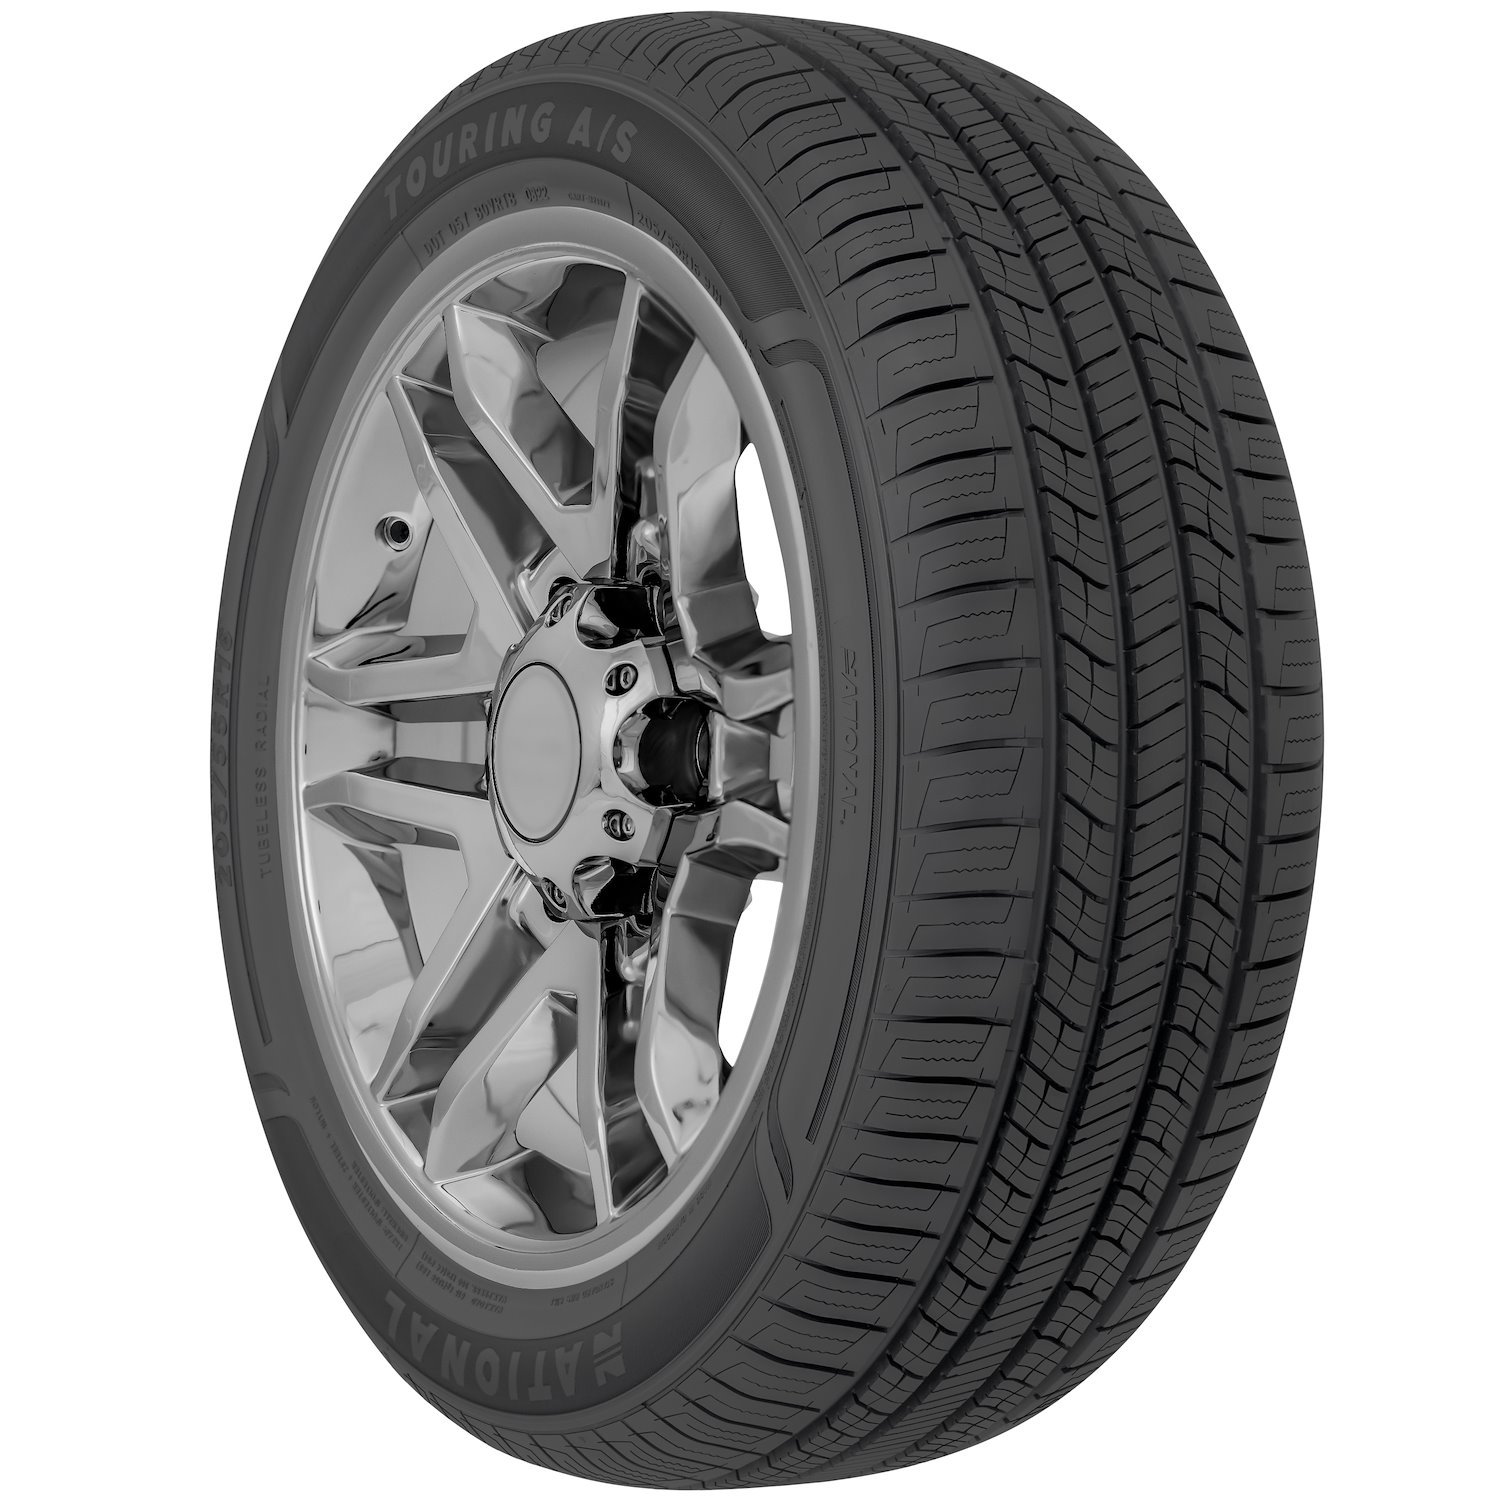 NLR14 Touring A/S Tire, 225/45R18